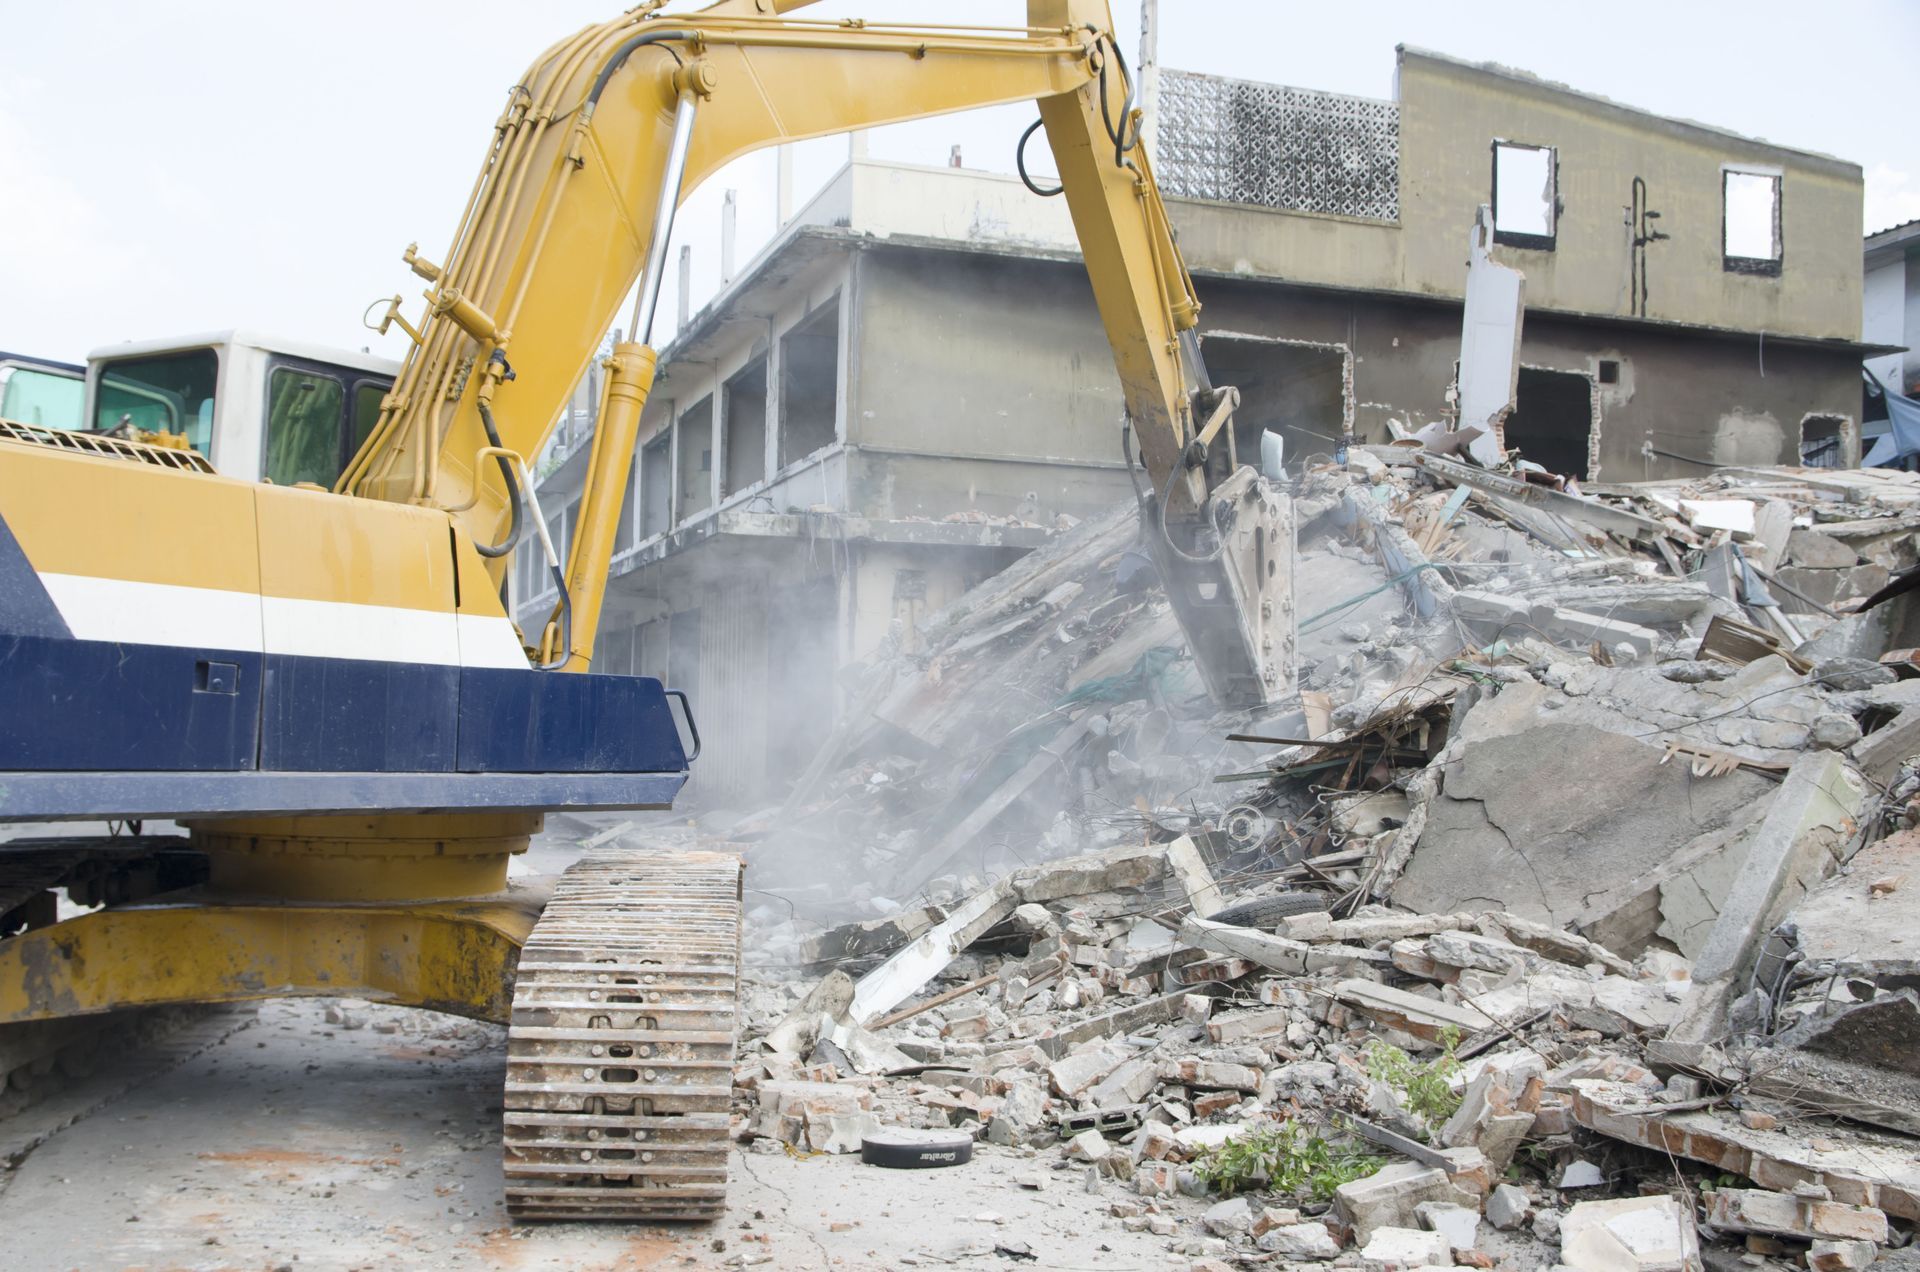 A large yellow excavator is demolishing a building.